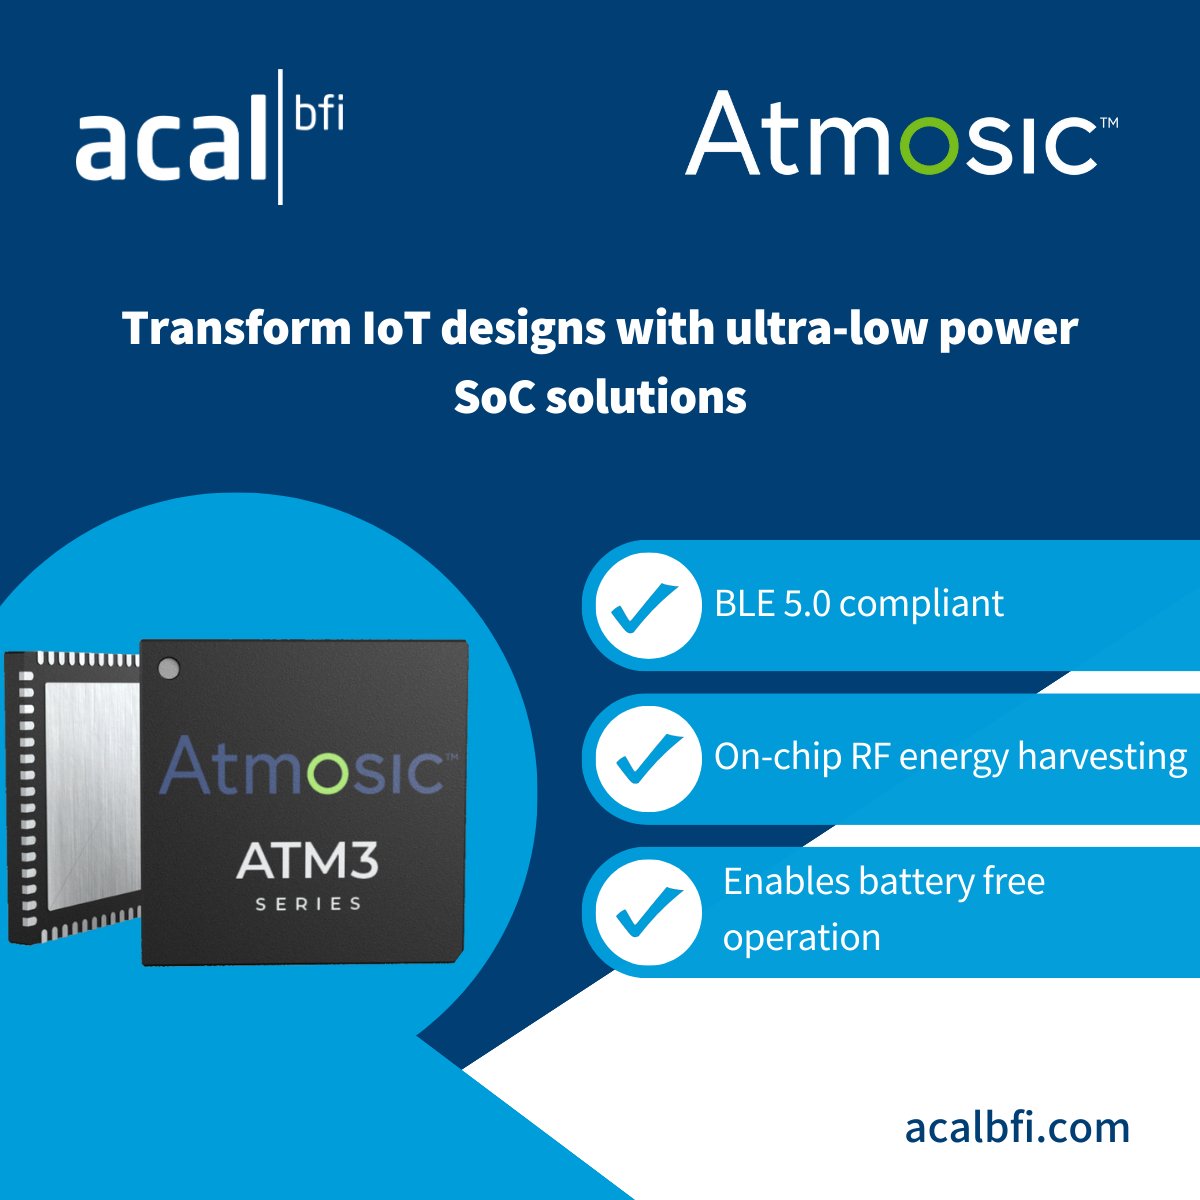 Our IoT & Wireless Technology Centre seamlessly integrates ATM3 into your designs and addresses complex challenges, delivering tailored solutions aligned with your evolving IoT needs. Find out more: bit.ly/3tWUOoI #batteryfree #nextgenwireless #energyharvesting